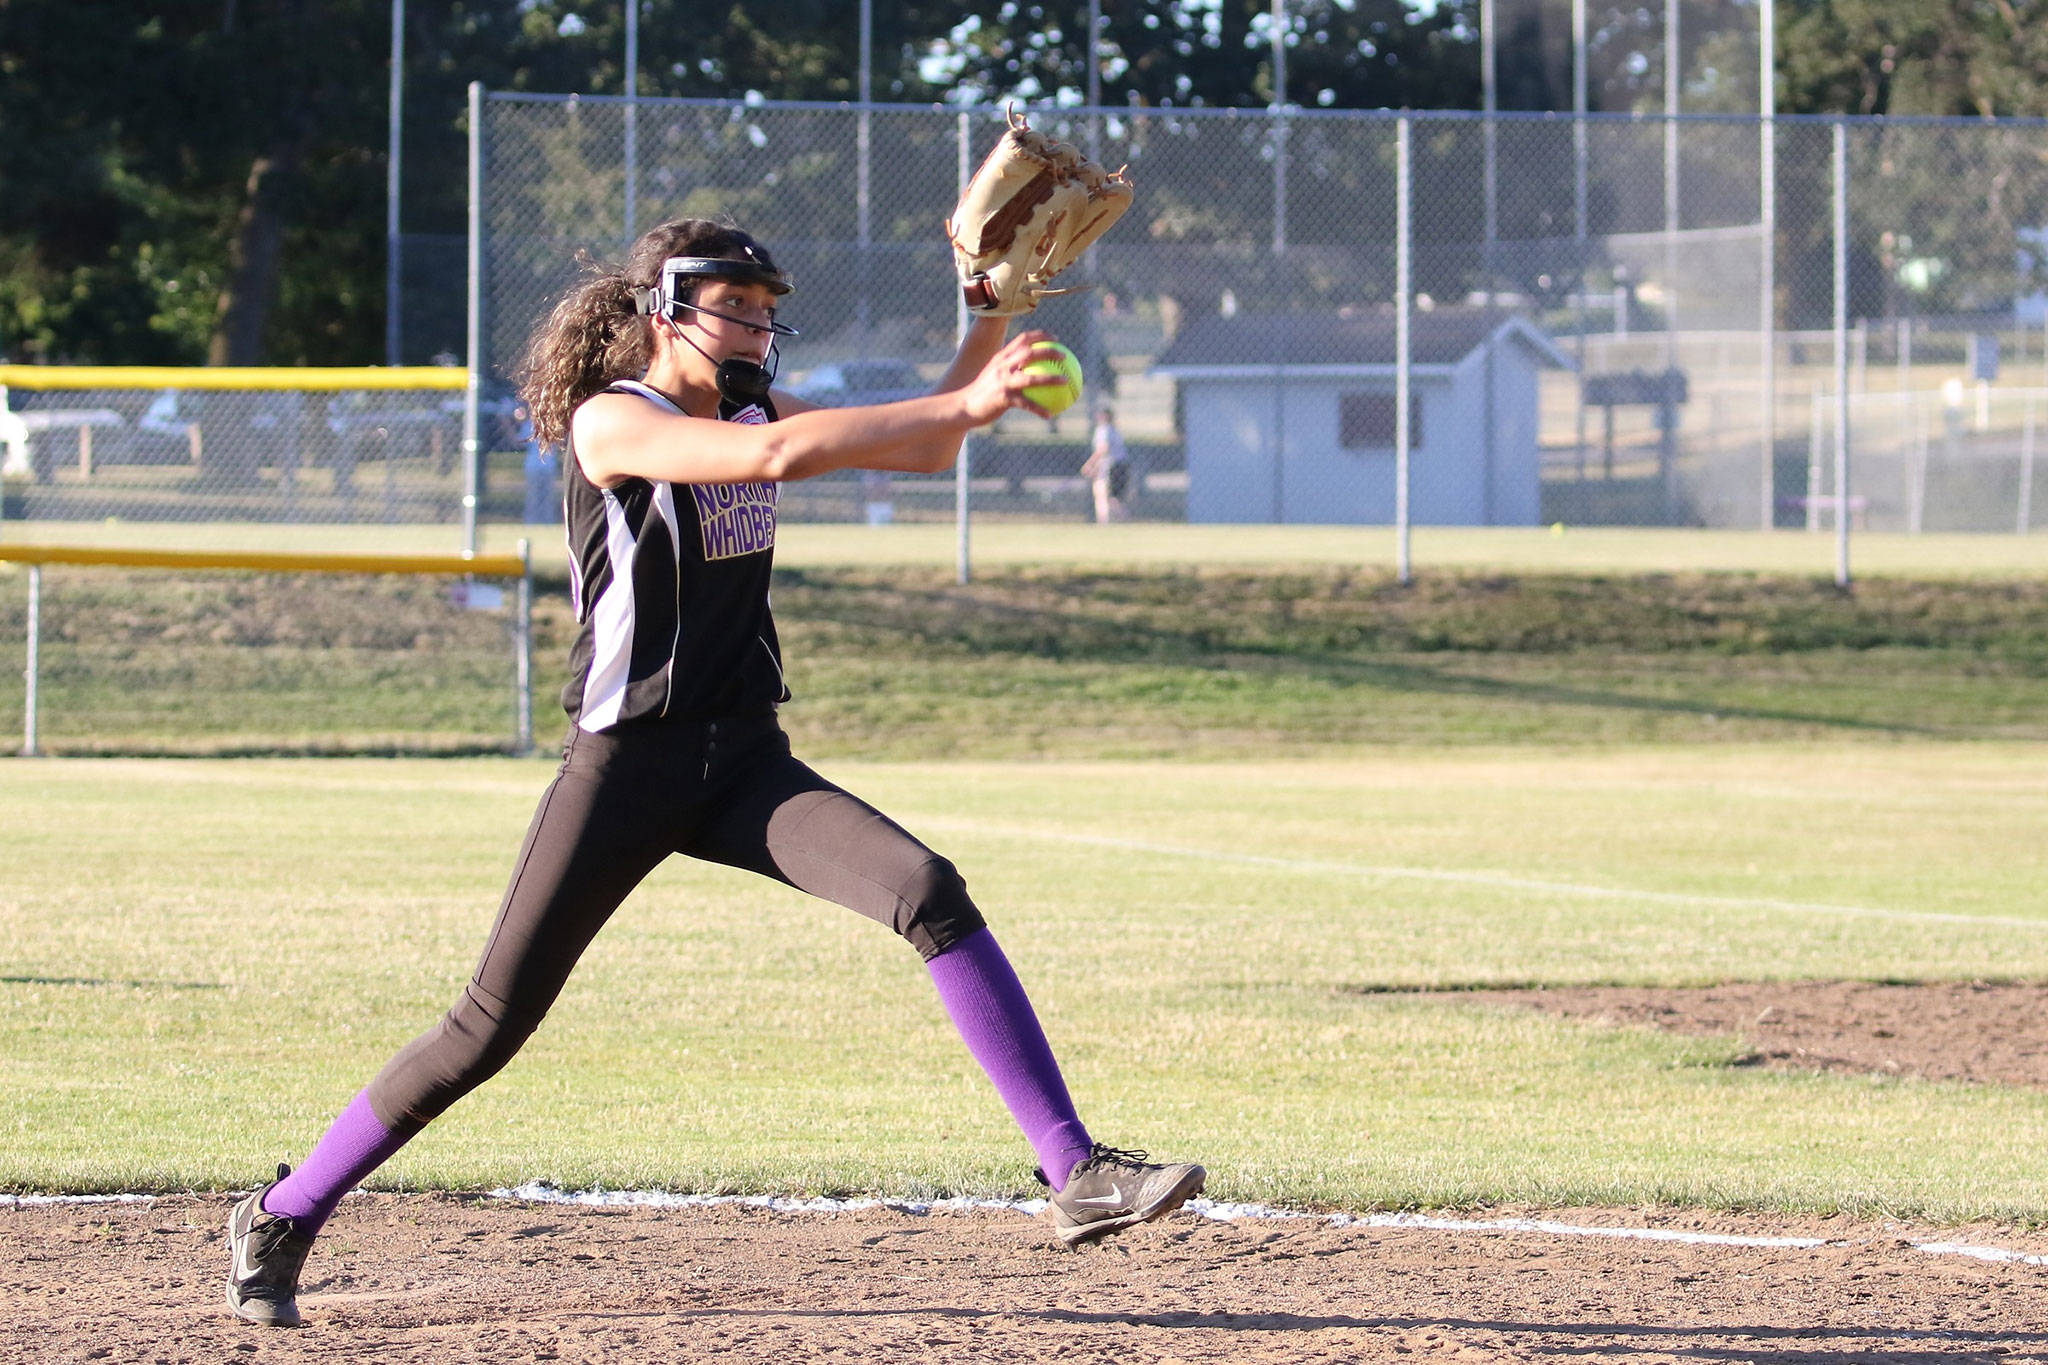 Macy Oliver fires a pitch in Friday’s game. Oliver was the winning pitcher in both games this weekend as North Whidbey claimed the district title. (Photo by John Fisken)